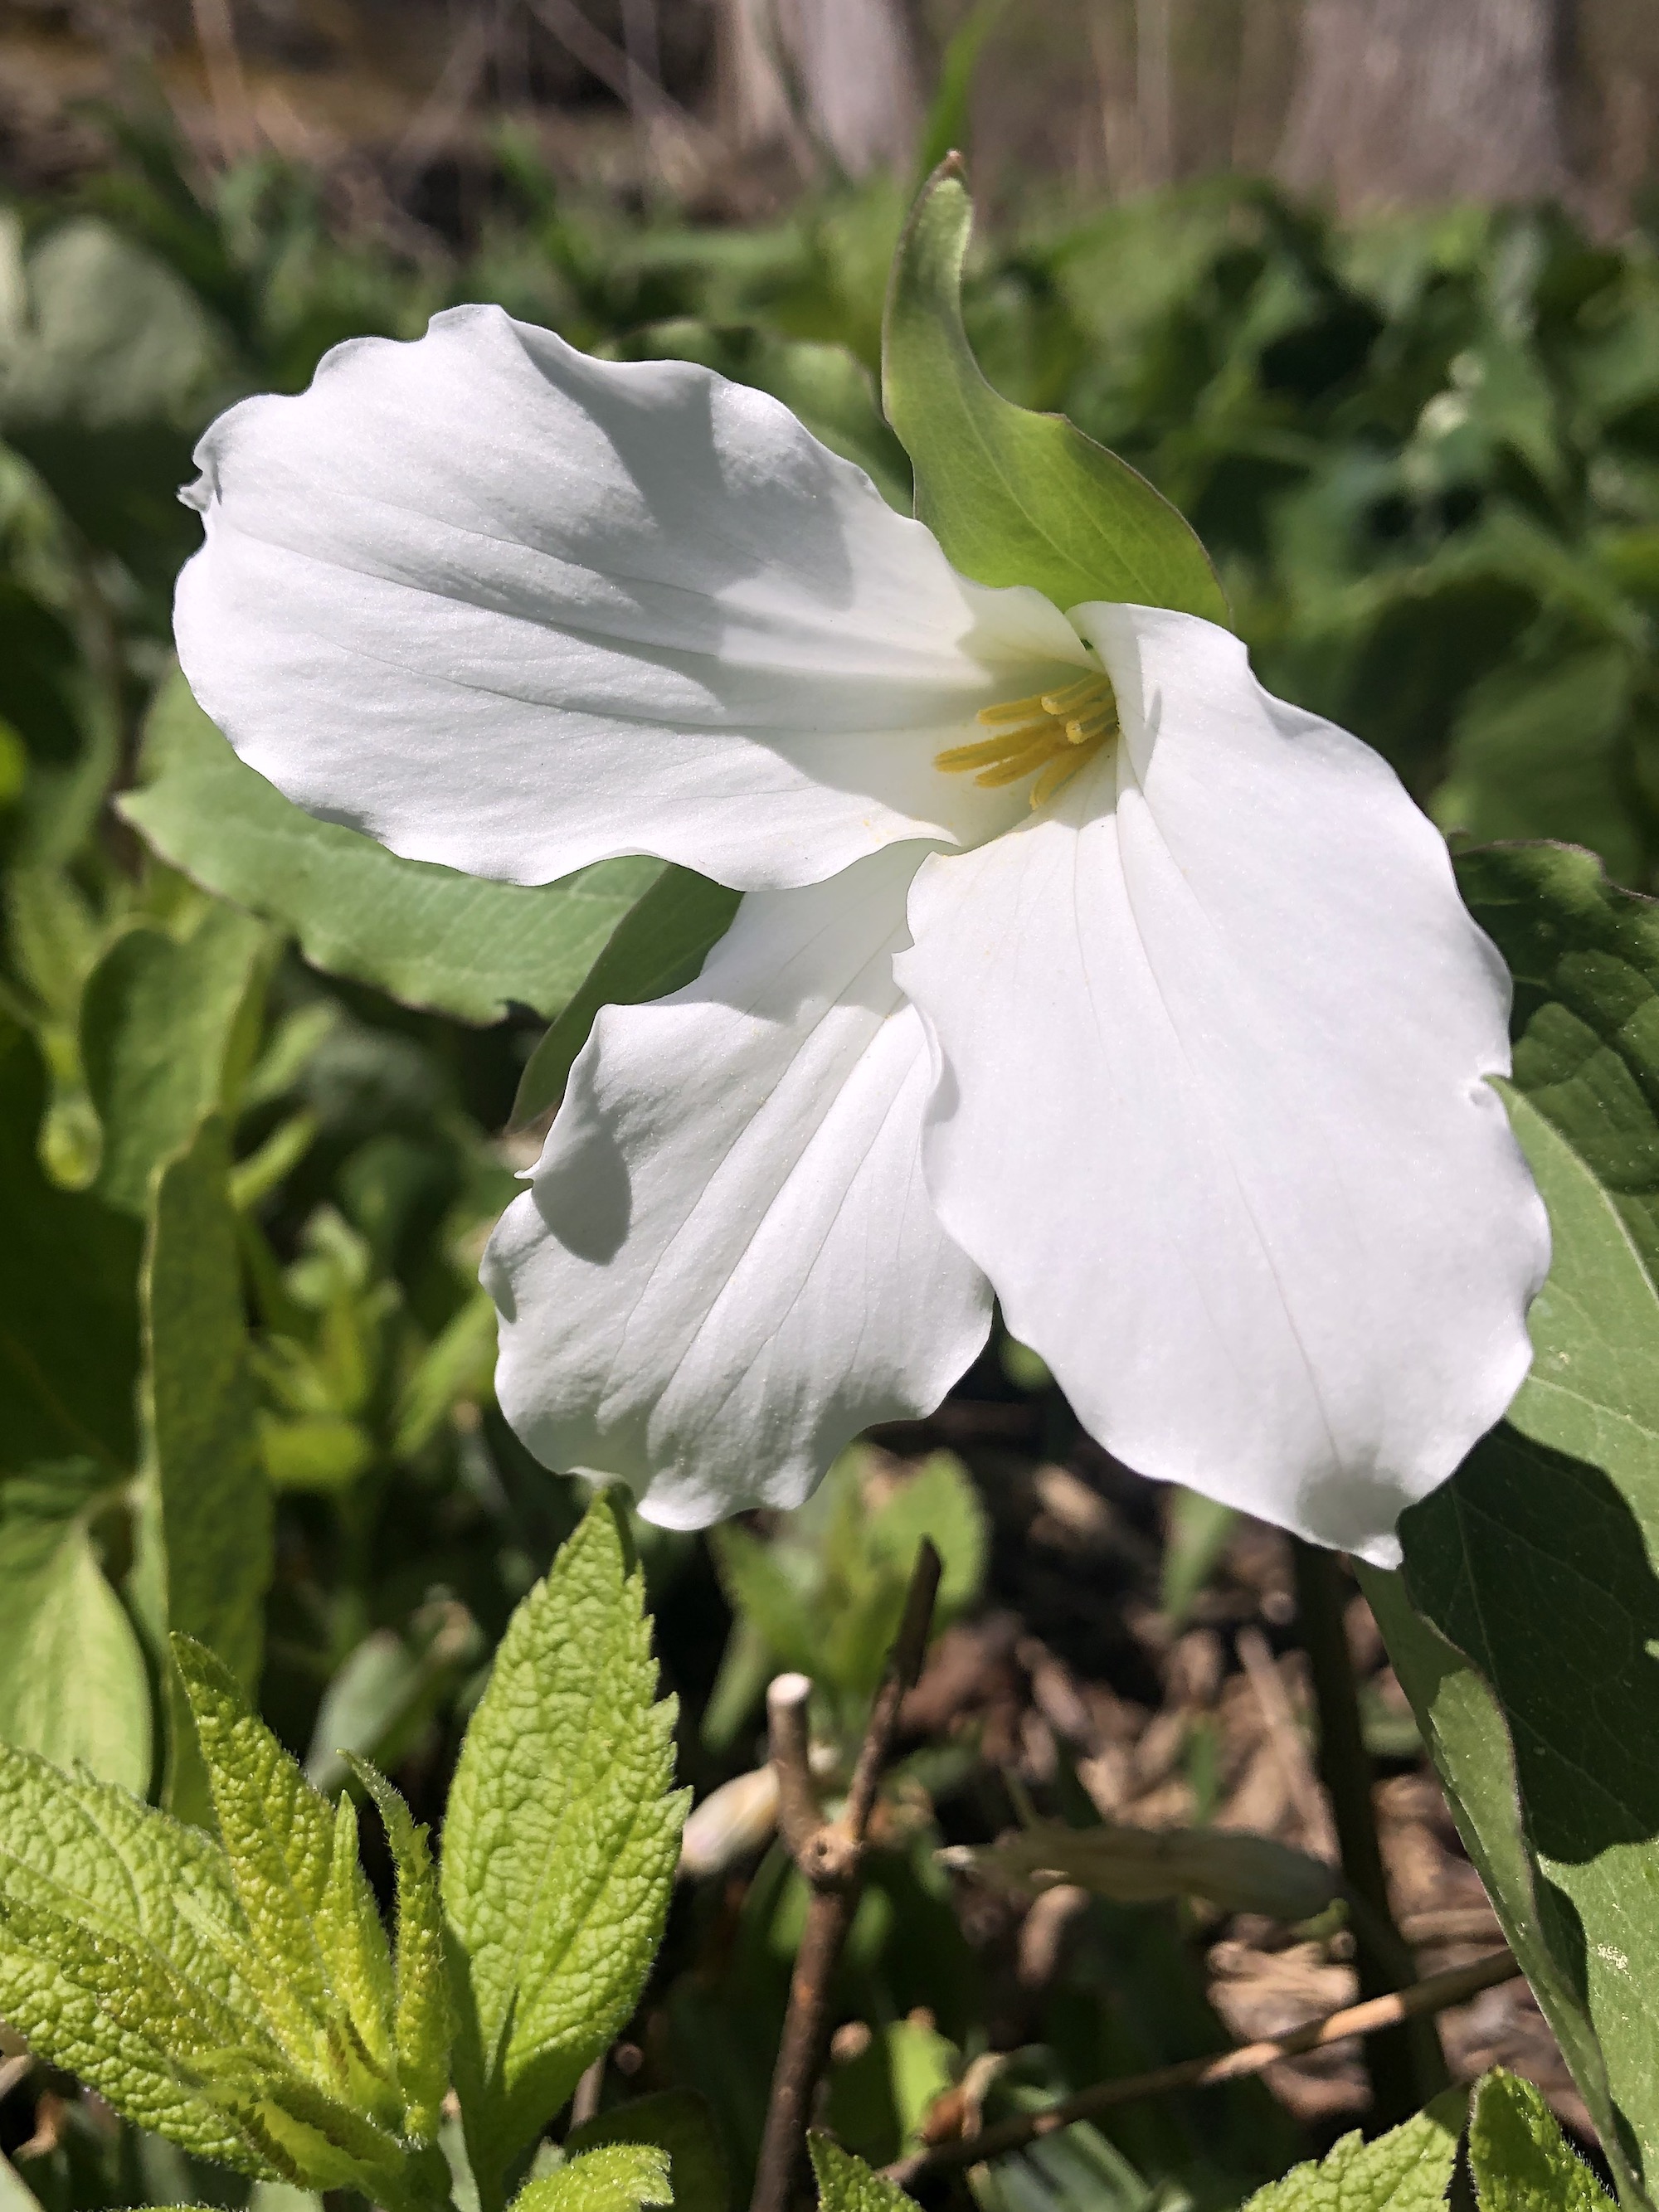 Great White Trillium near Council Ring in Oak Savanna in Madison, Wisconsin on April 30, 2021.